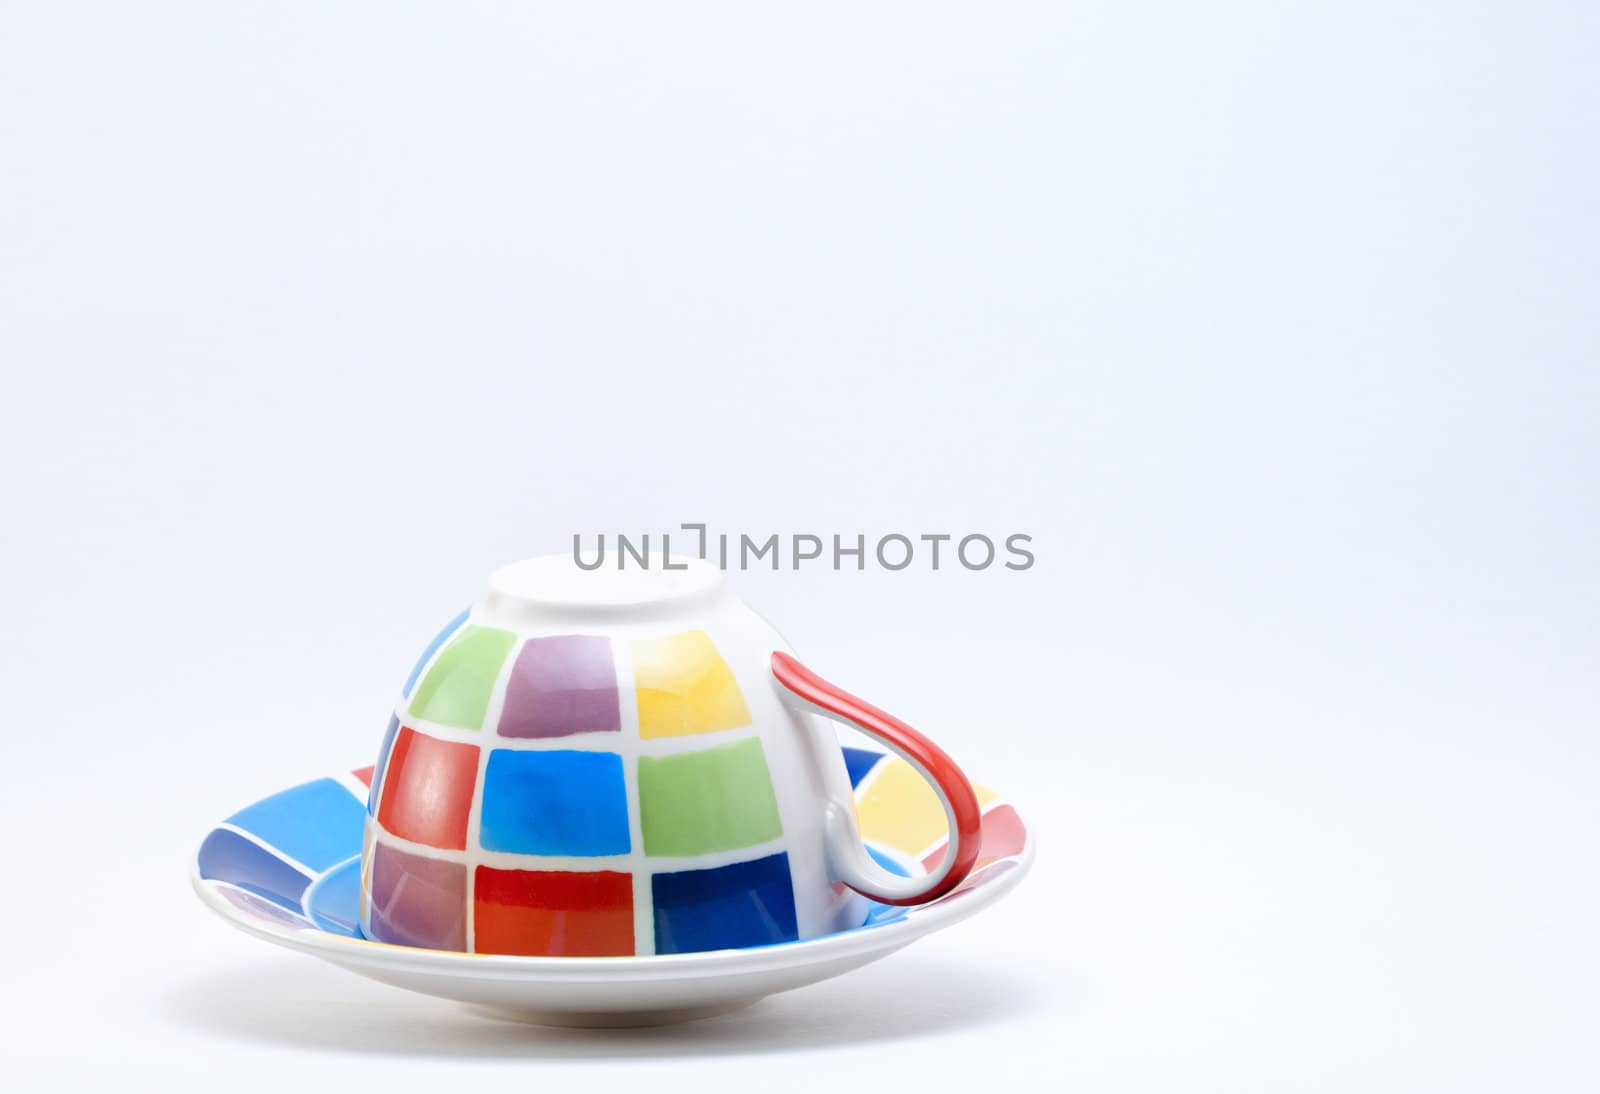 Colourful Checkered Cup on a White Background.